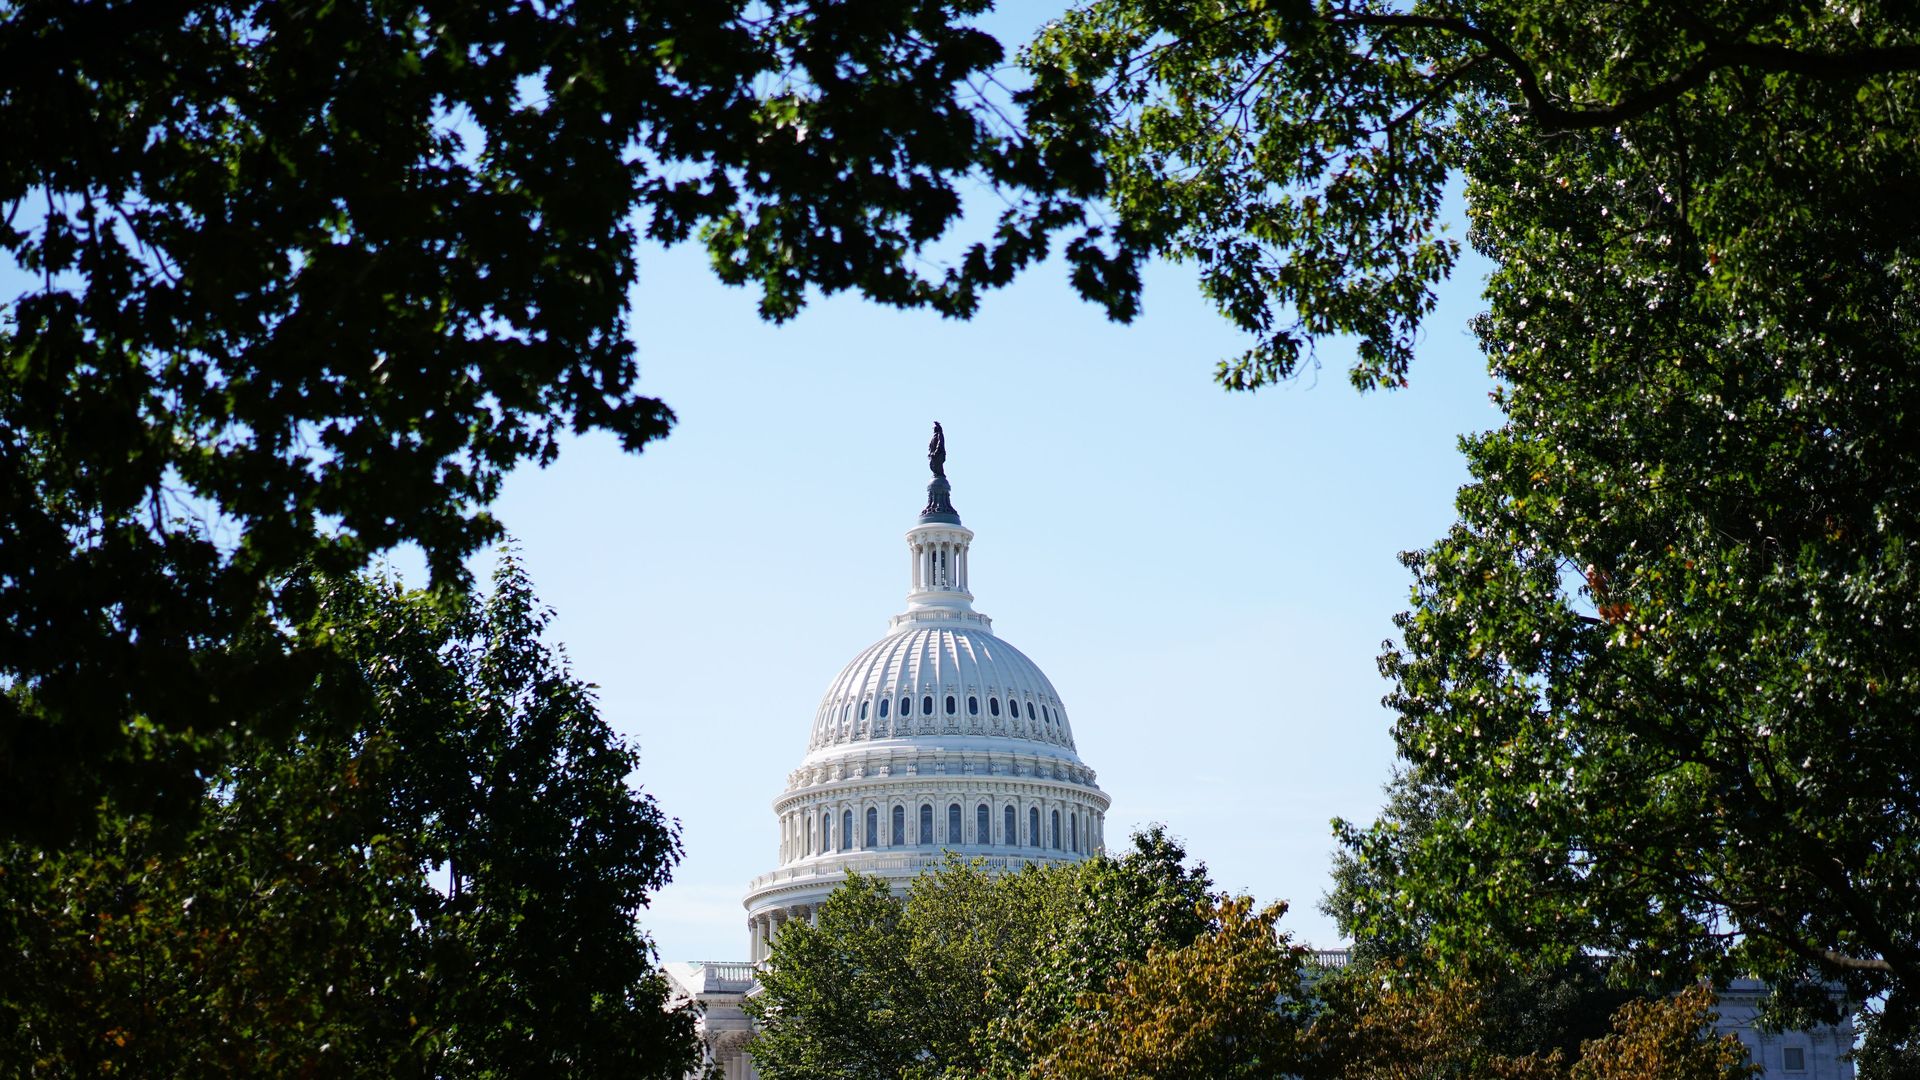 A long view of the U.S. Capitol Building surrounded by trees.